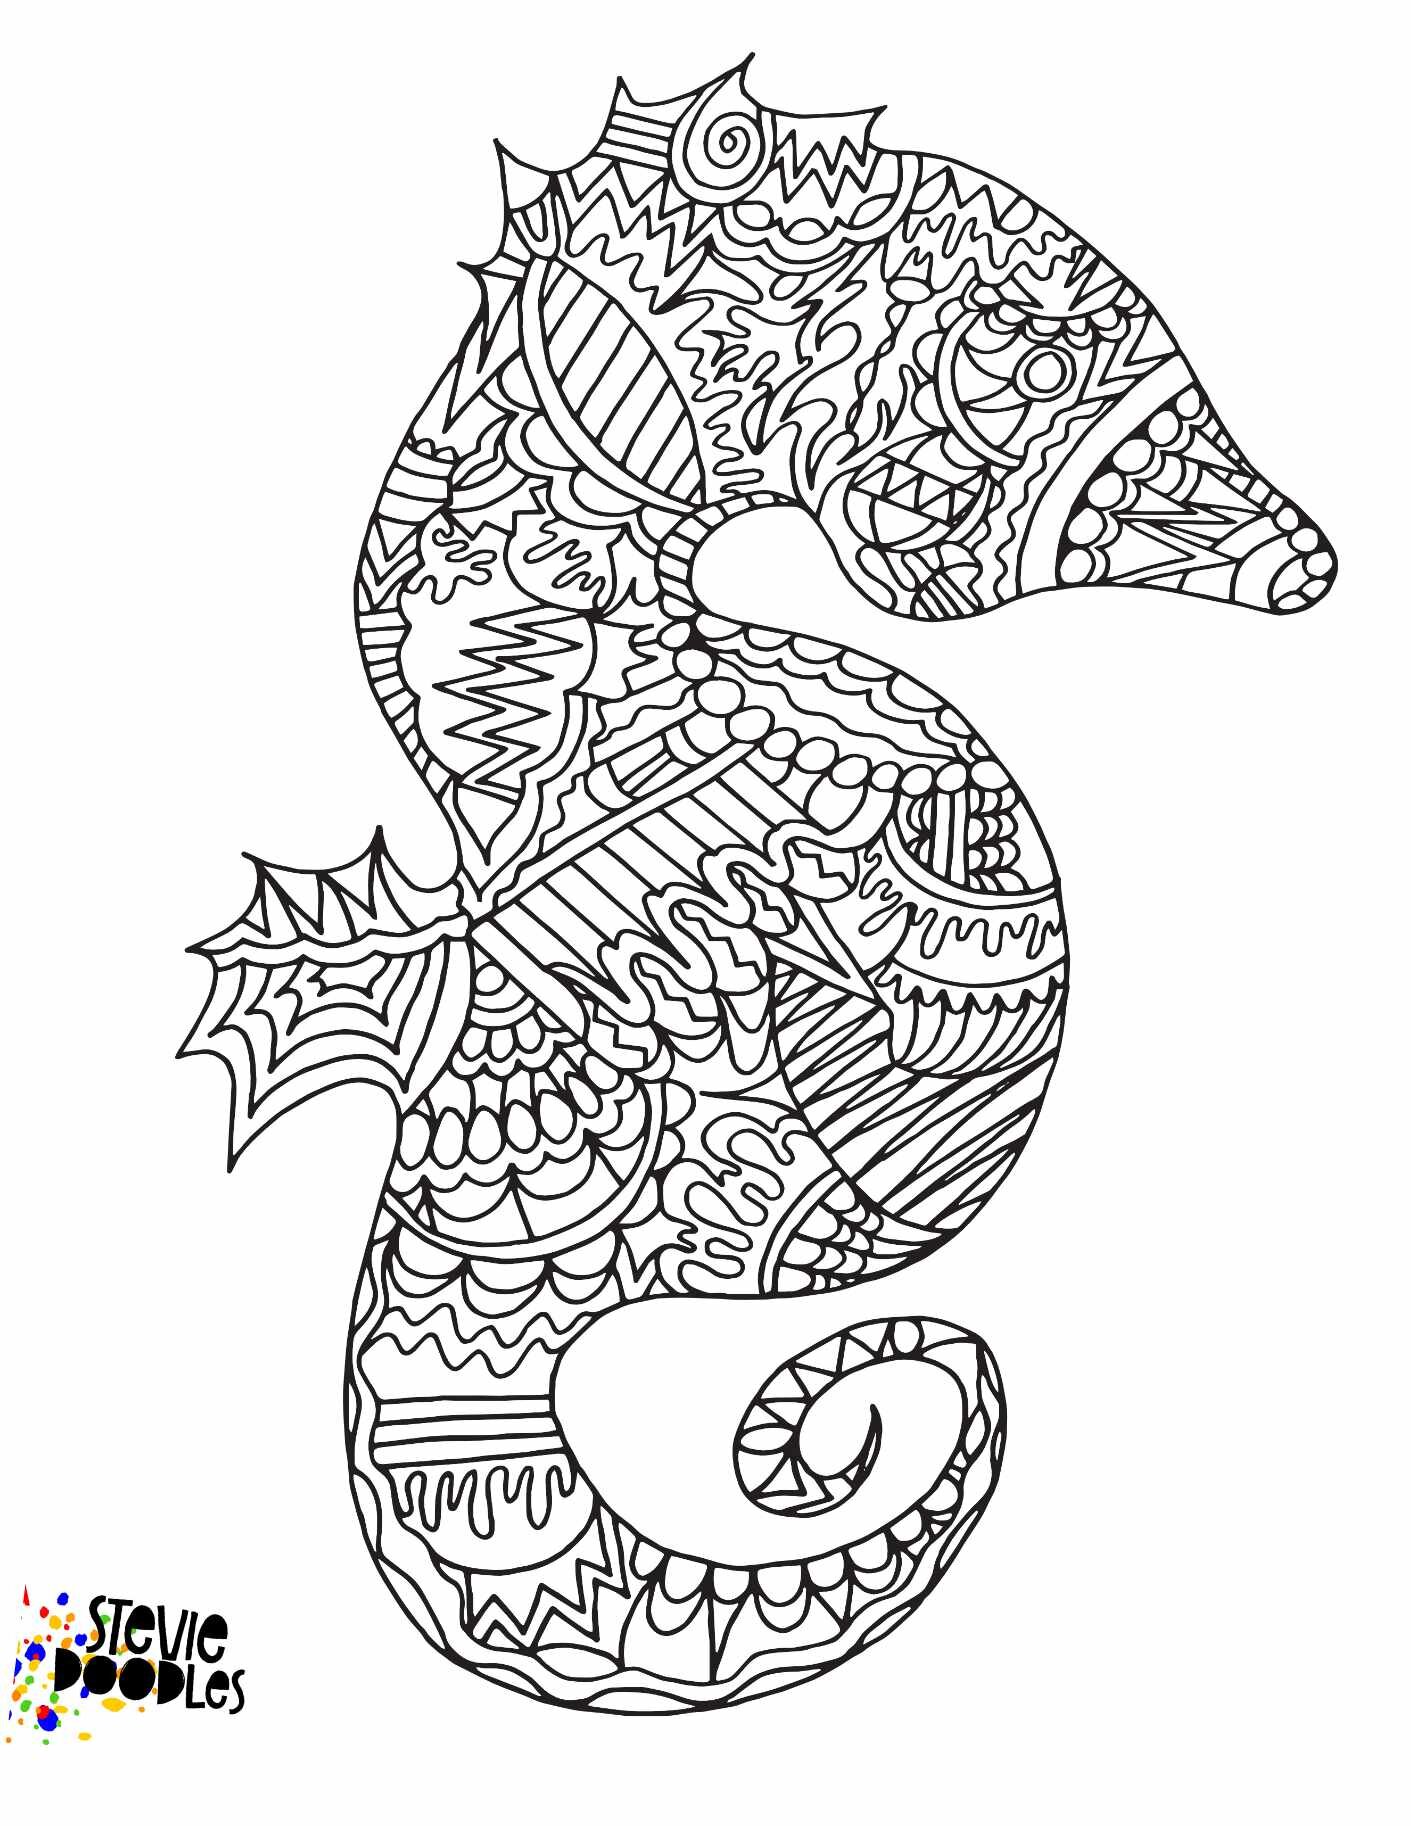 Free Seahorse Coloring Page!! CLICK HERE TO DOWNLOAD THE PAGE ABOVE